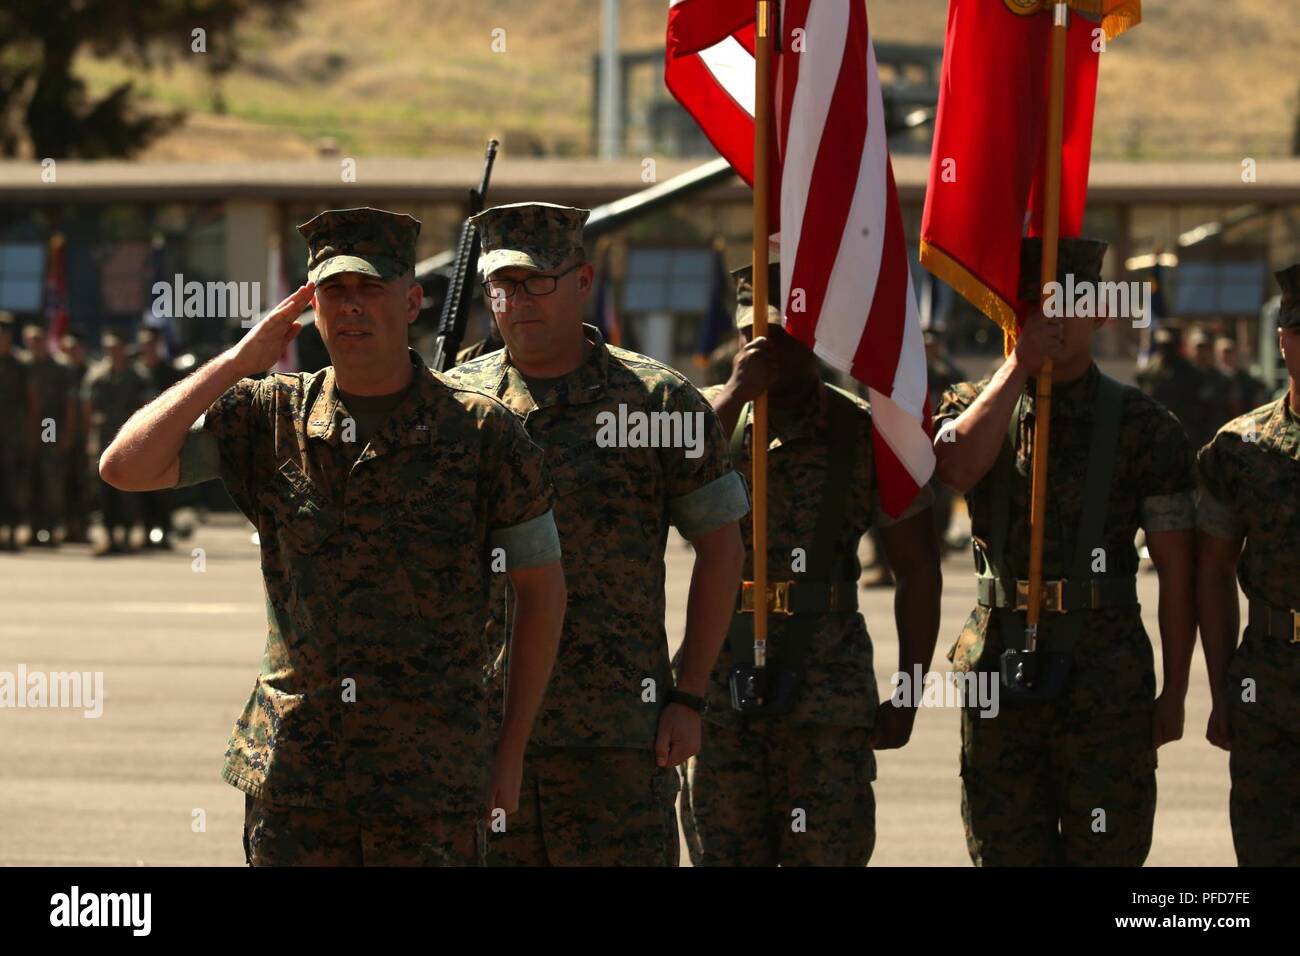 U.S. Marine Corps Chief Warrant Officer 5 David C. Thomas, center, with Fire and Maneuver Intergration Division, Headquarters Marine Corps, stands at attention during a retirement ceremony at Marine Corps Base Camp Pendleton, Calif., June 7, 2018. The ceremony was held in honor of Thomas for his 30 years of meritorious service. Stock Photo